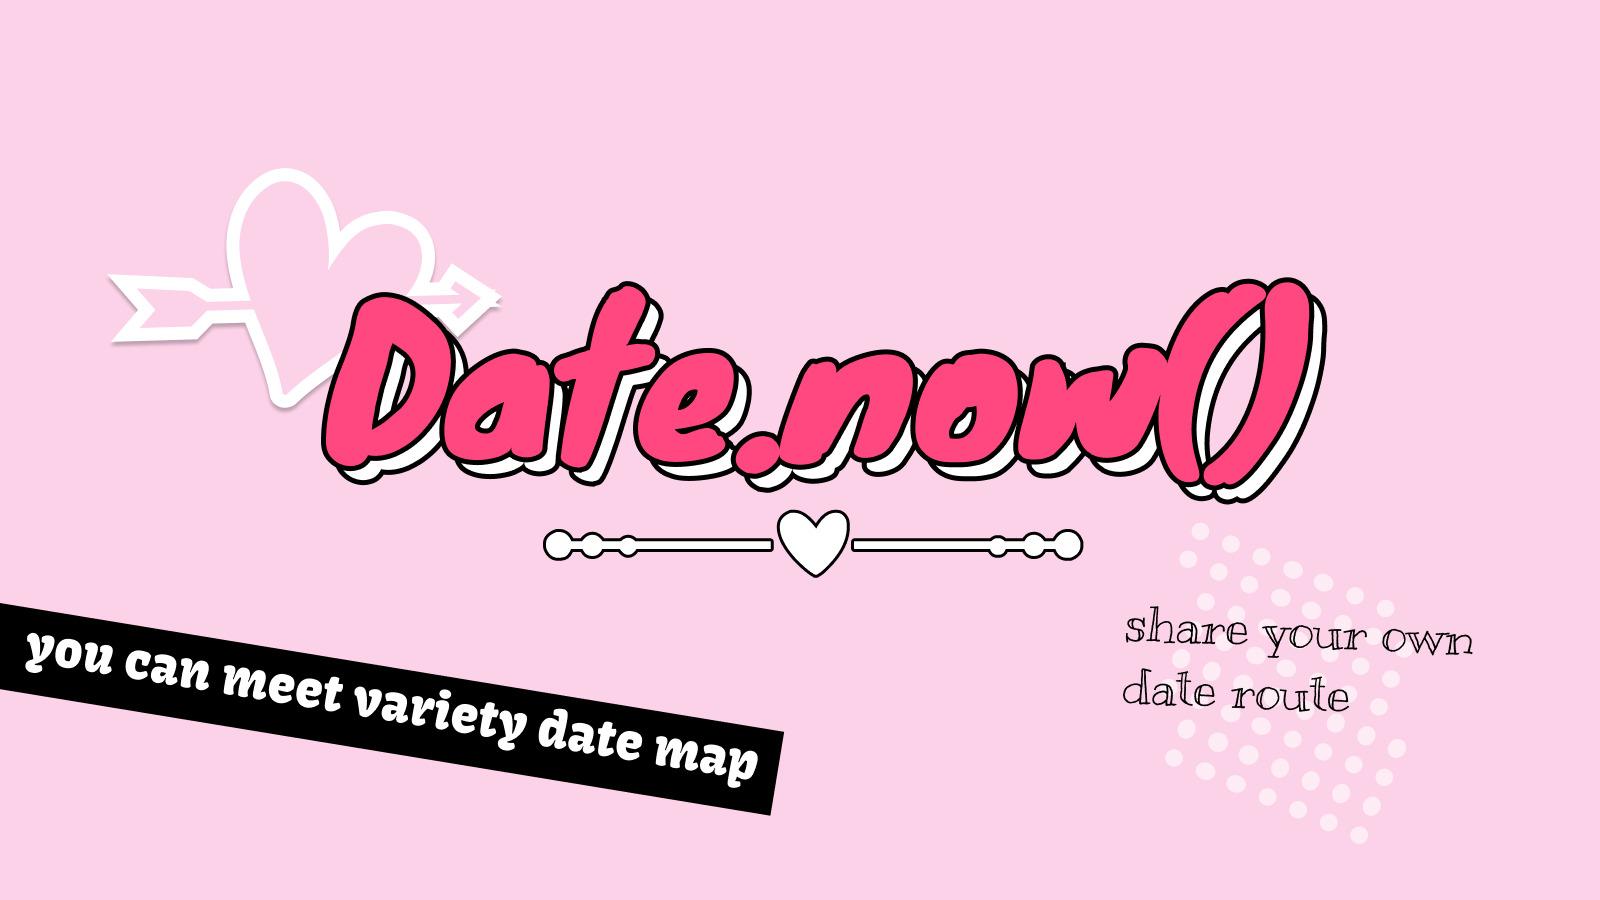 Date.now()